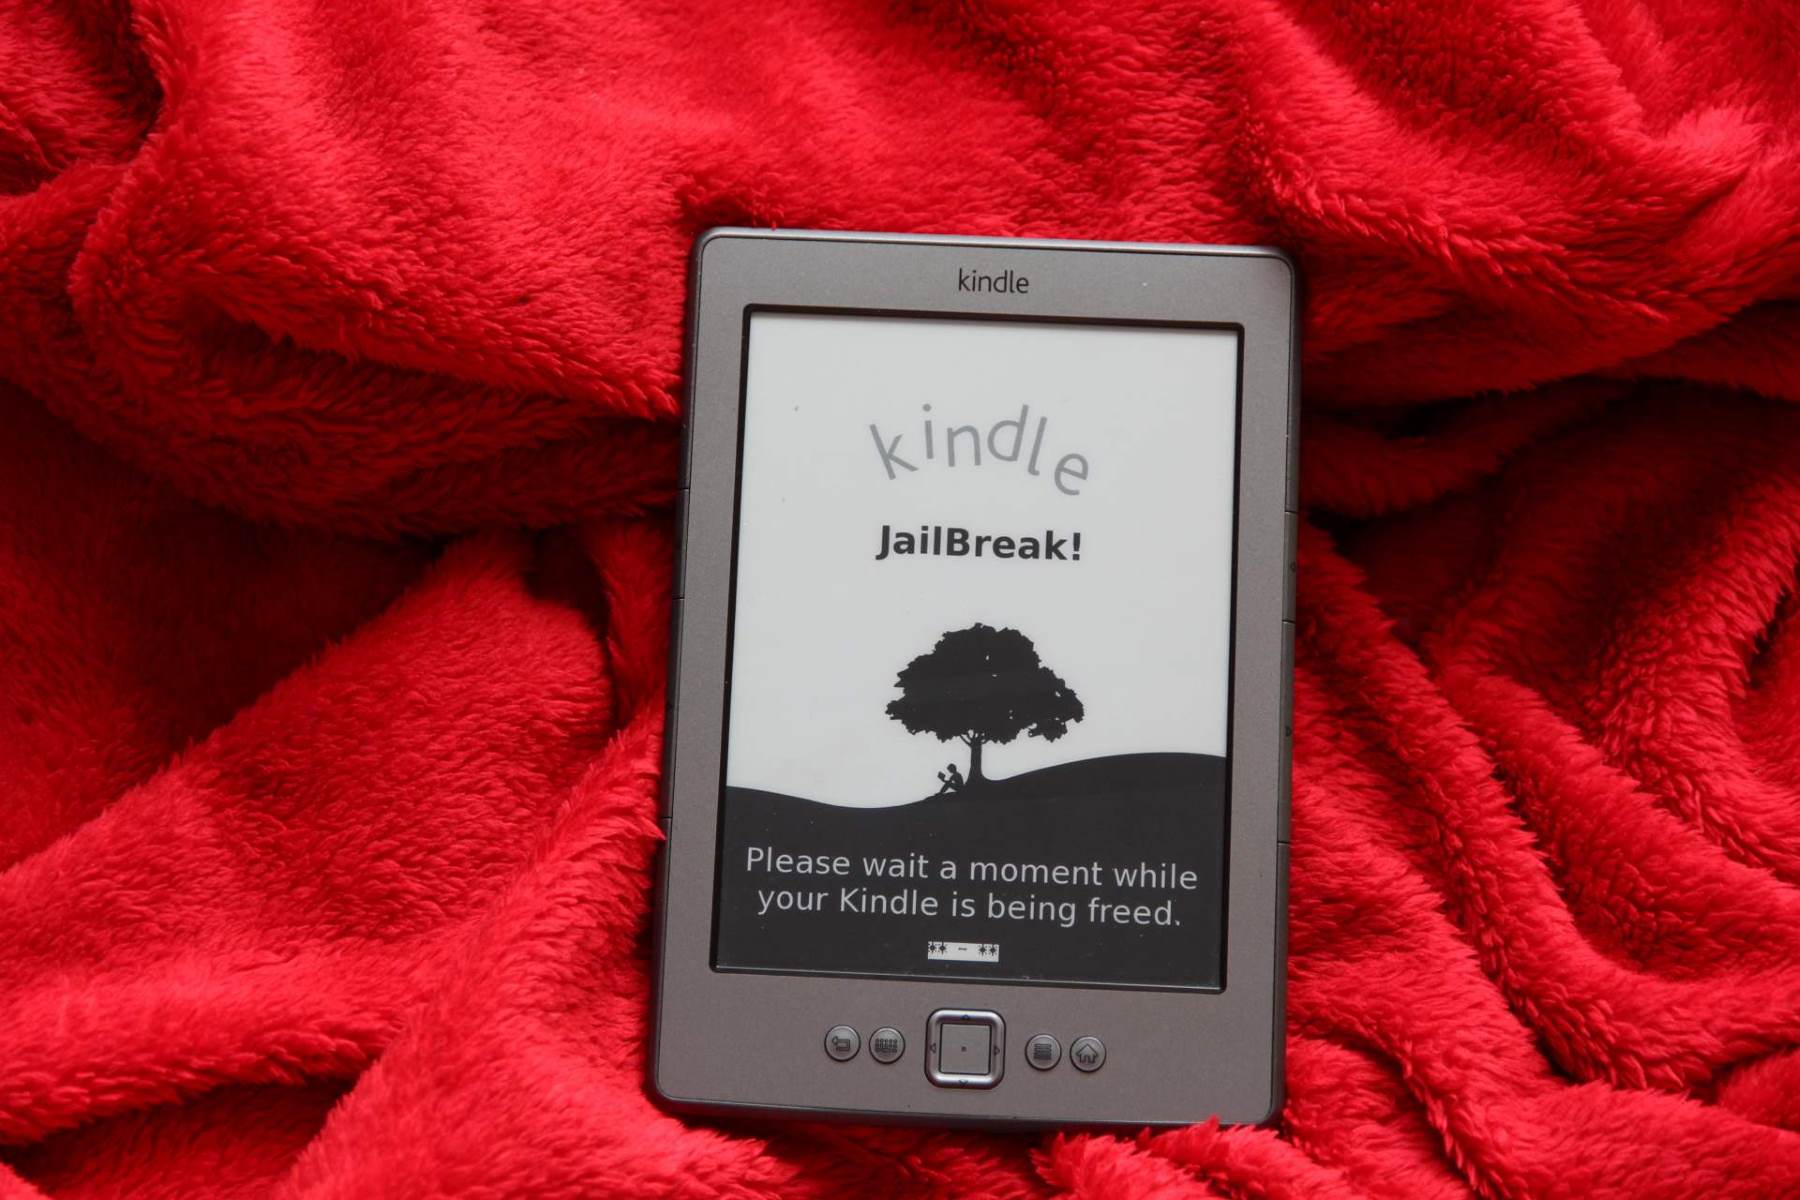 How To Jailbreak A Kindle